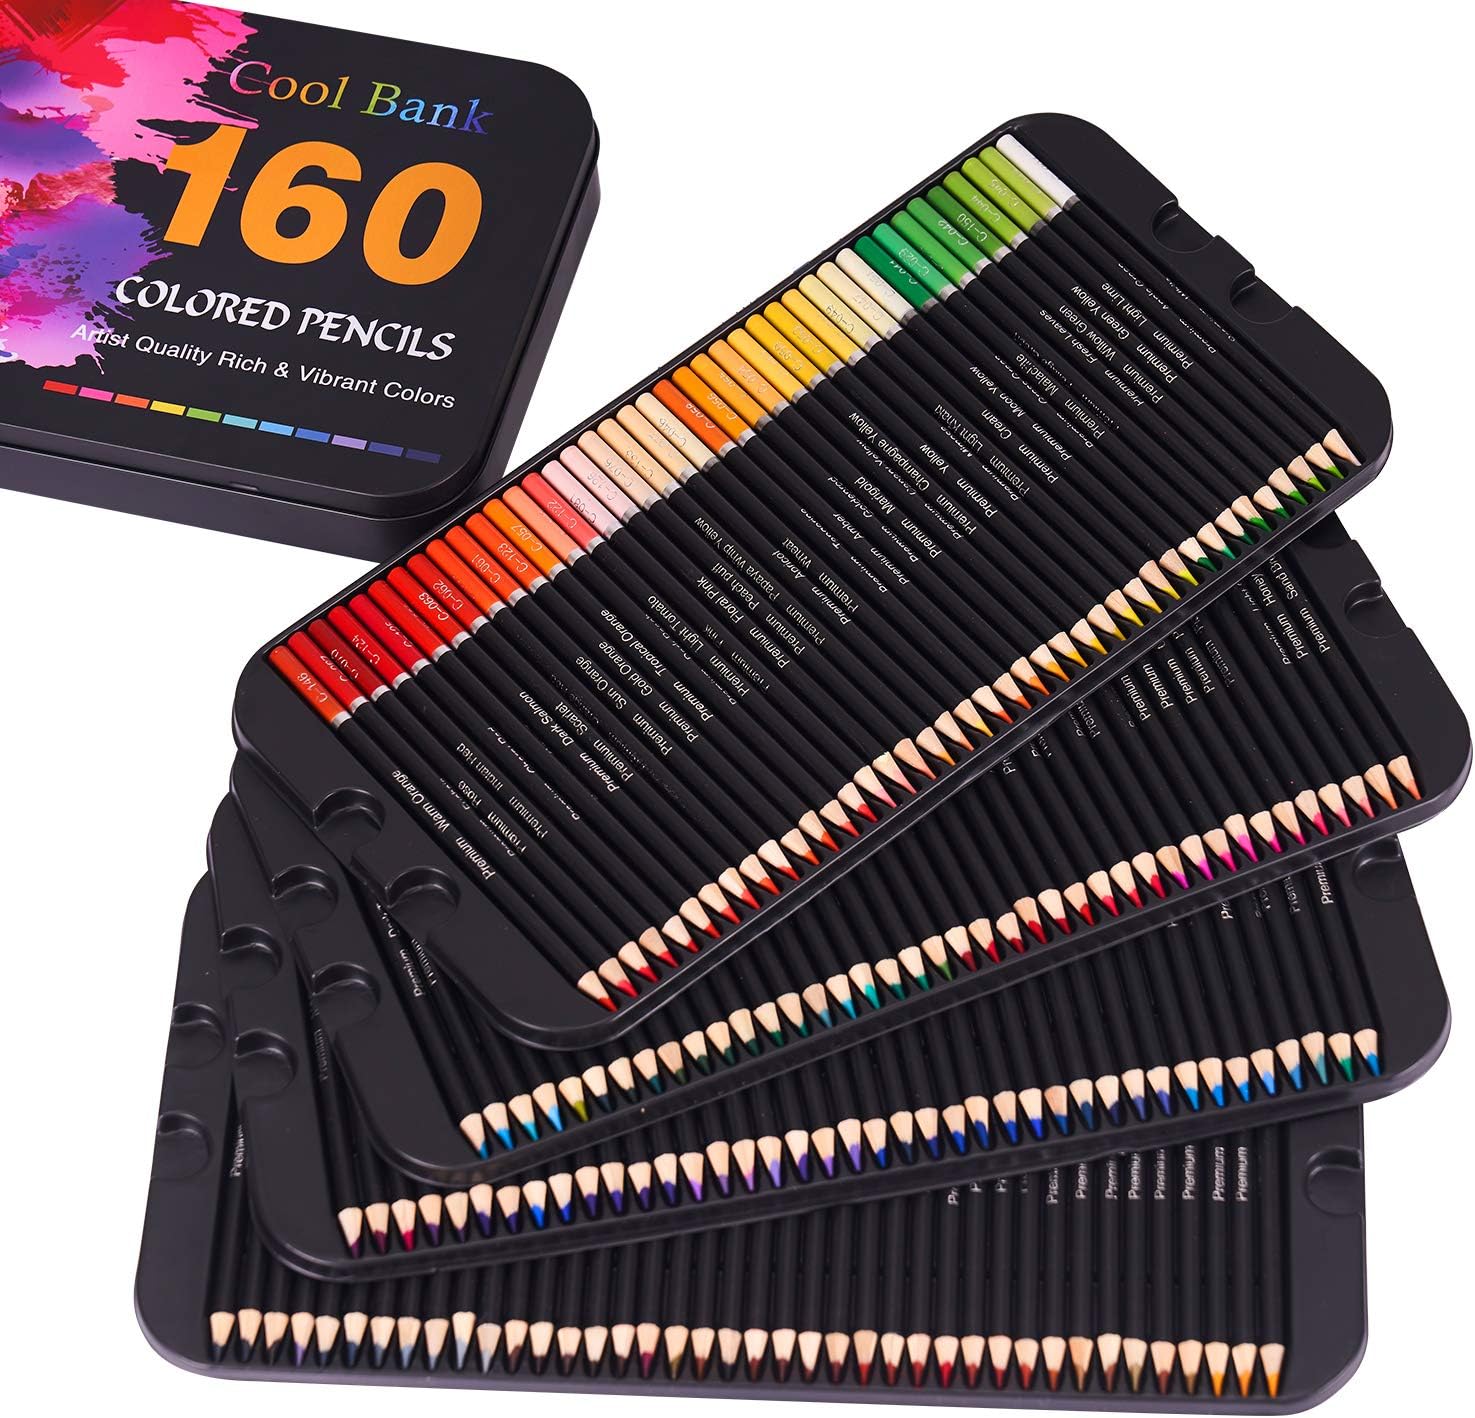 160 Professional Colored Pencils, Artist Pencils Set for Coloring Books, Premium Artist Soft Series Lead with Vibrant Colors for Sketching, Shading & Coloring in Tin Box - image 5 of 7